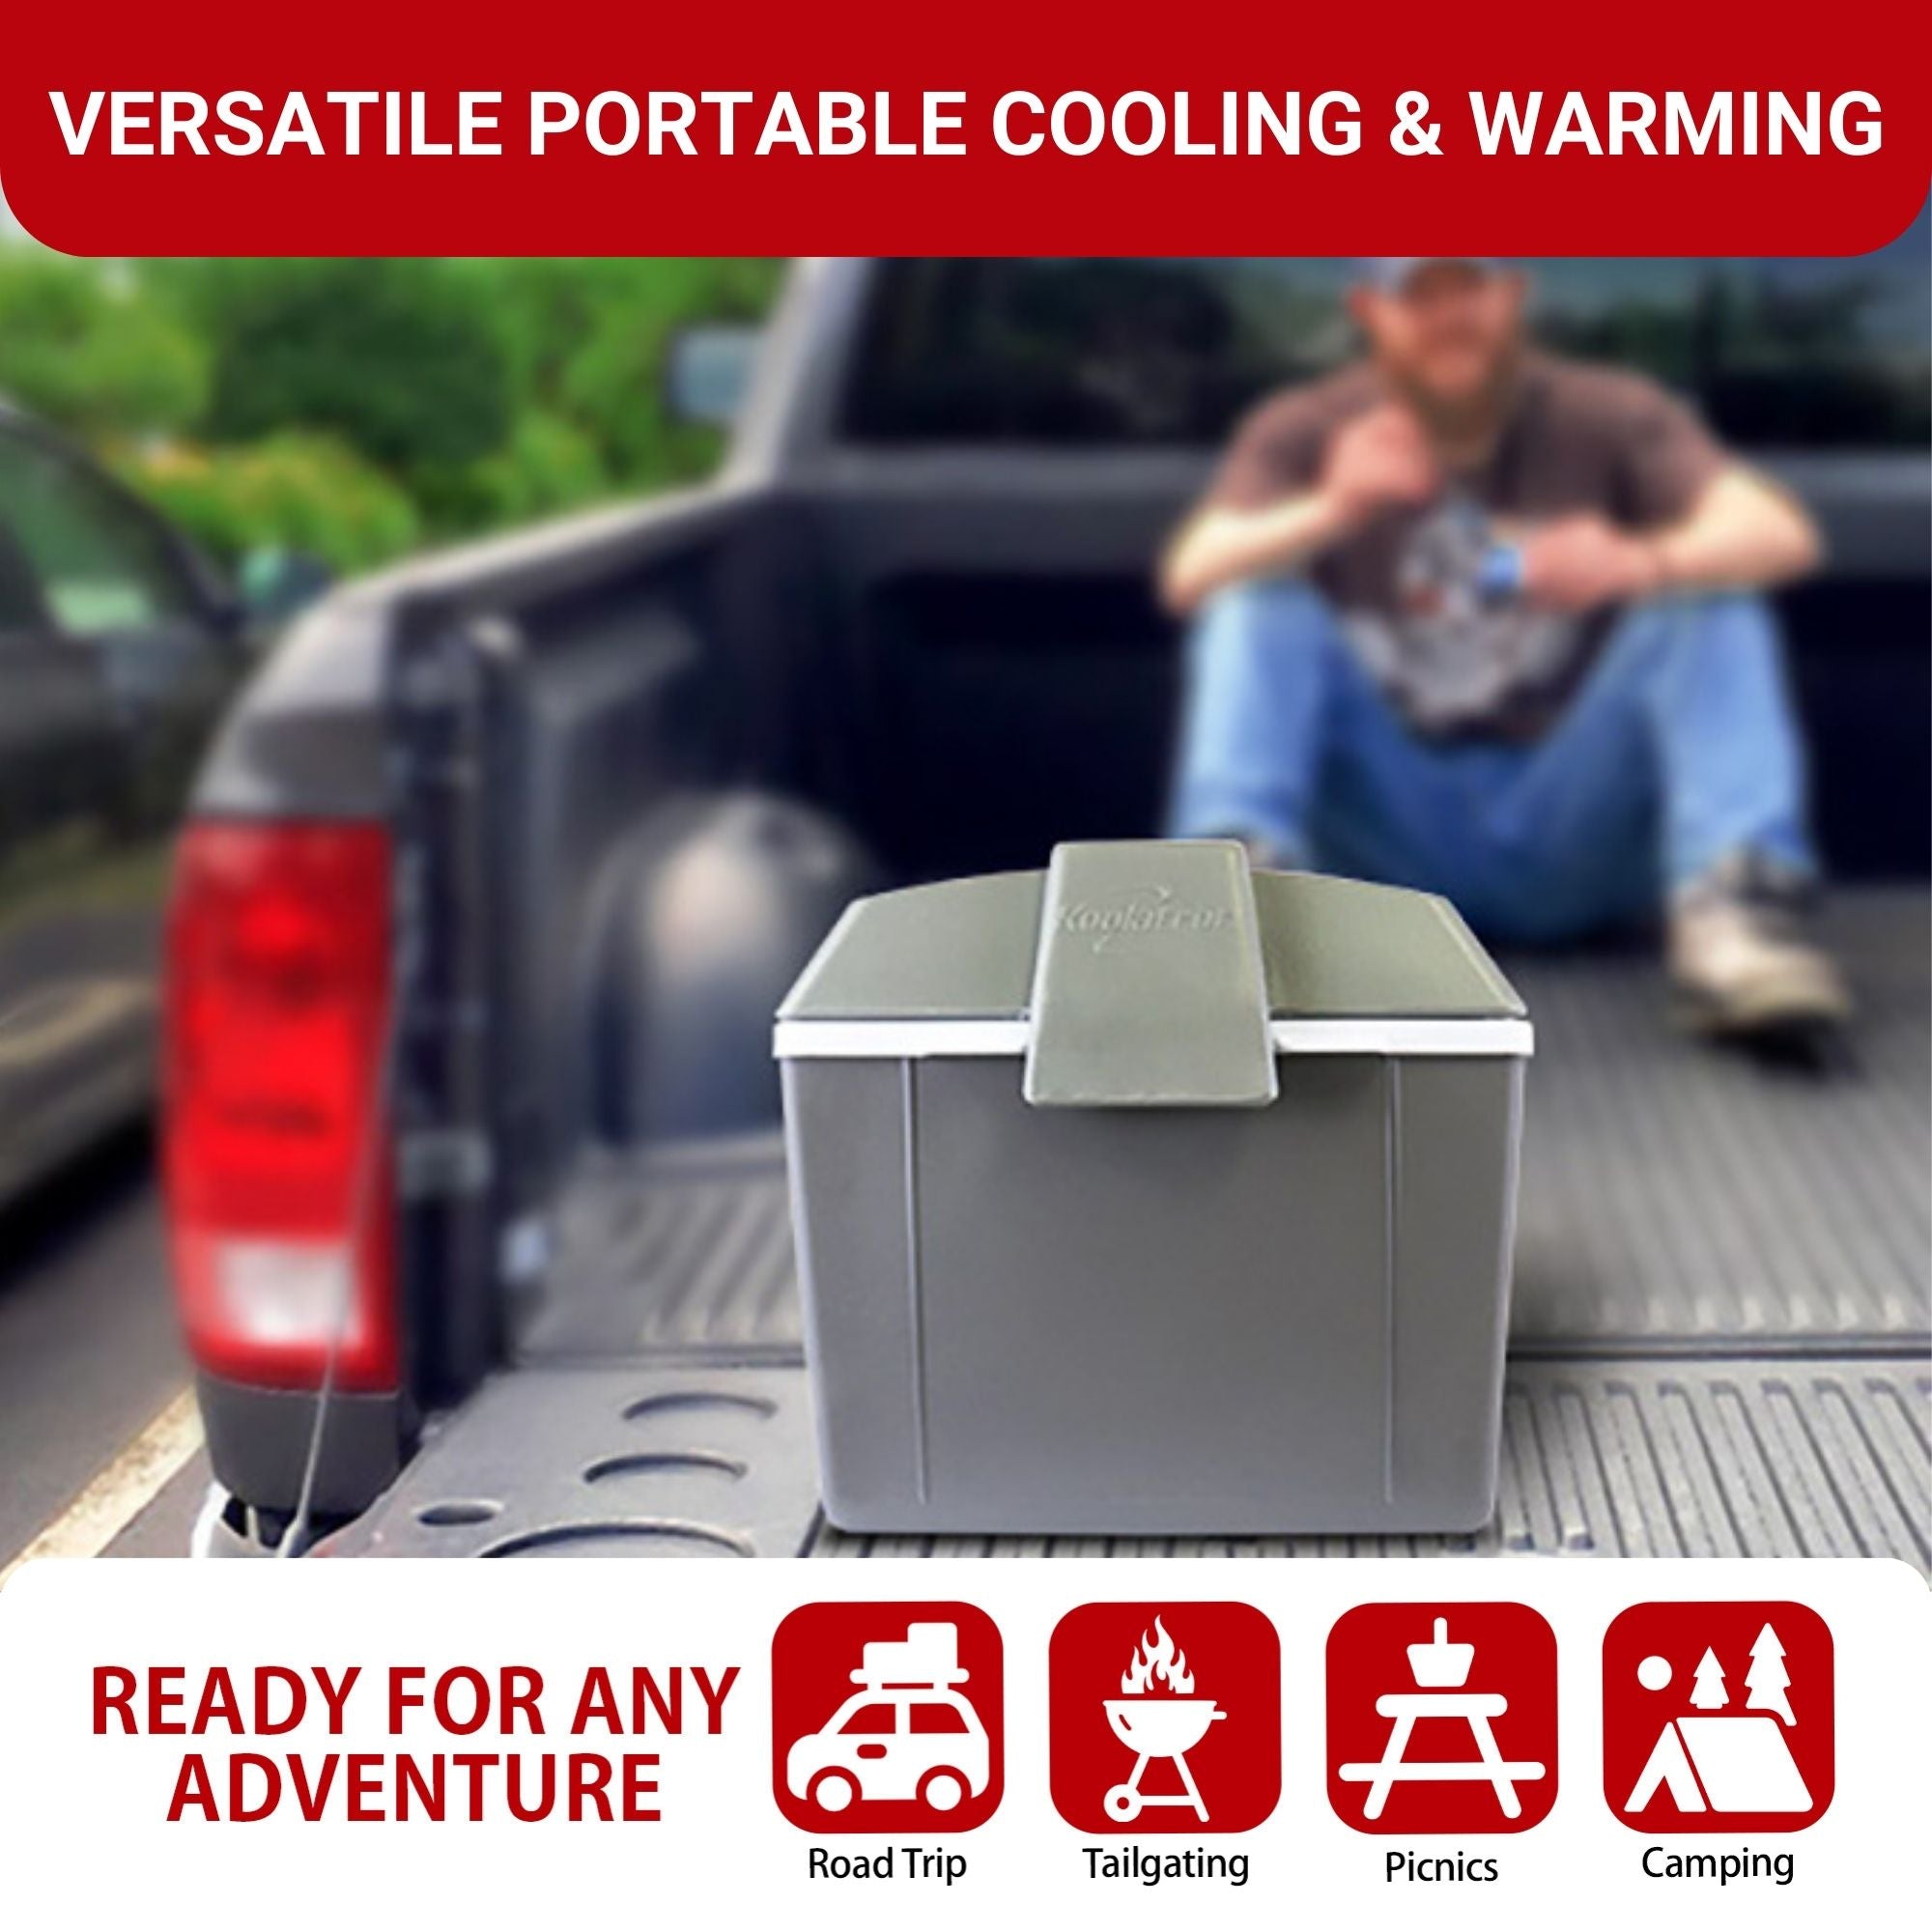 Koolatron 12V cooler/warmer, closed, on the tailgate of a pickup truck, with a person in t-shirt, jeans, and baseball cap sitting in the truck bed in the background. Text above reads, "VERSATILE ICELESS COOLING & WARMING." Text below reads, "READY FOR ANY ADVENTURE" followed by icons labeled: Road trip, tailgating, picnics, and camping.